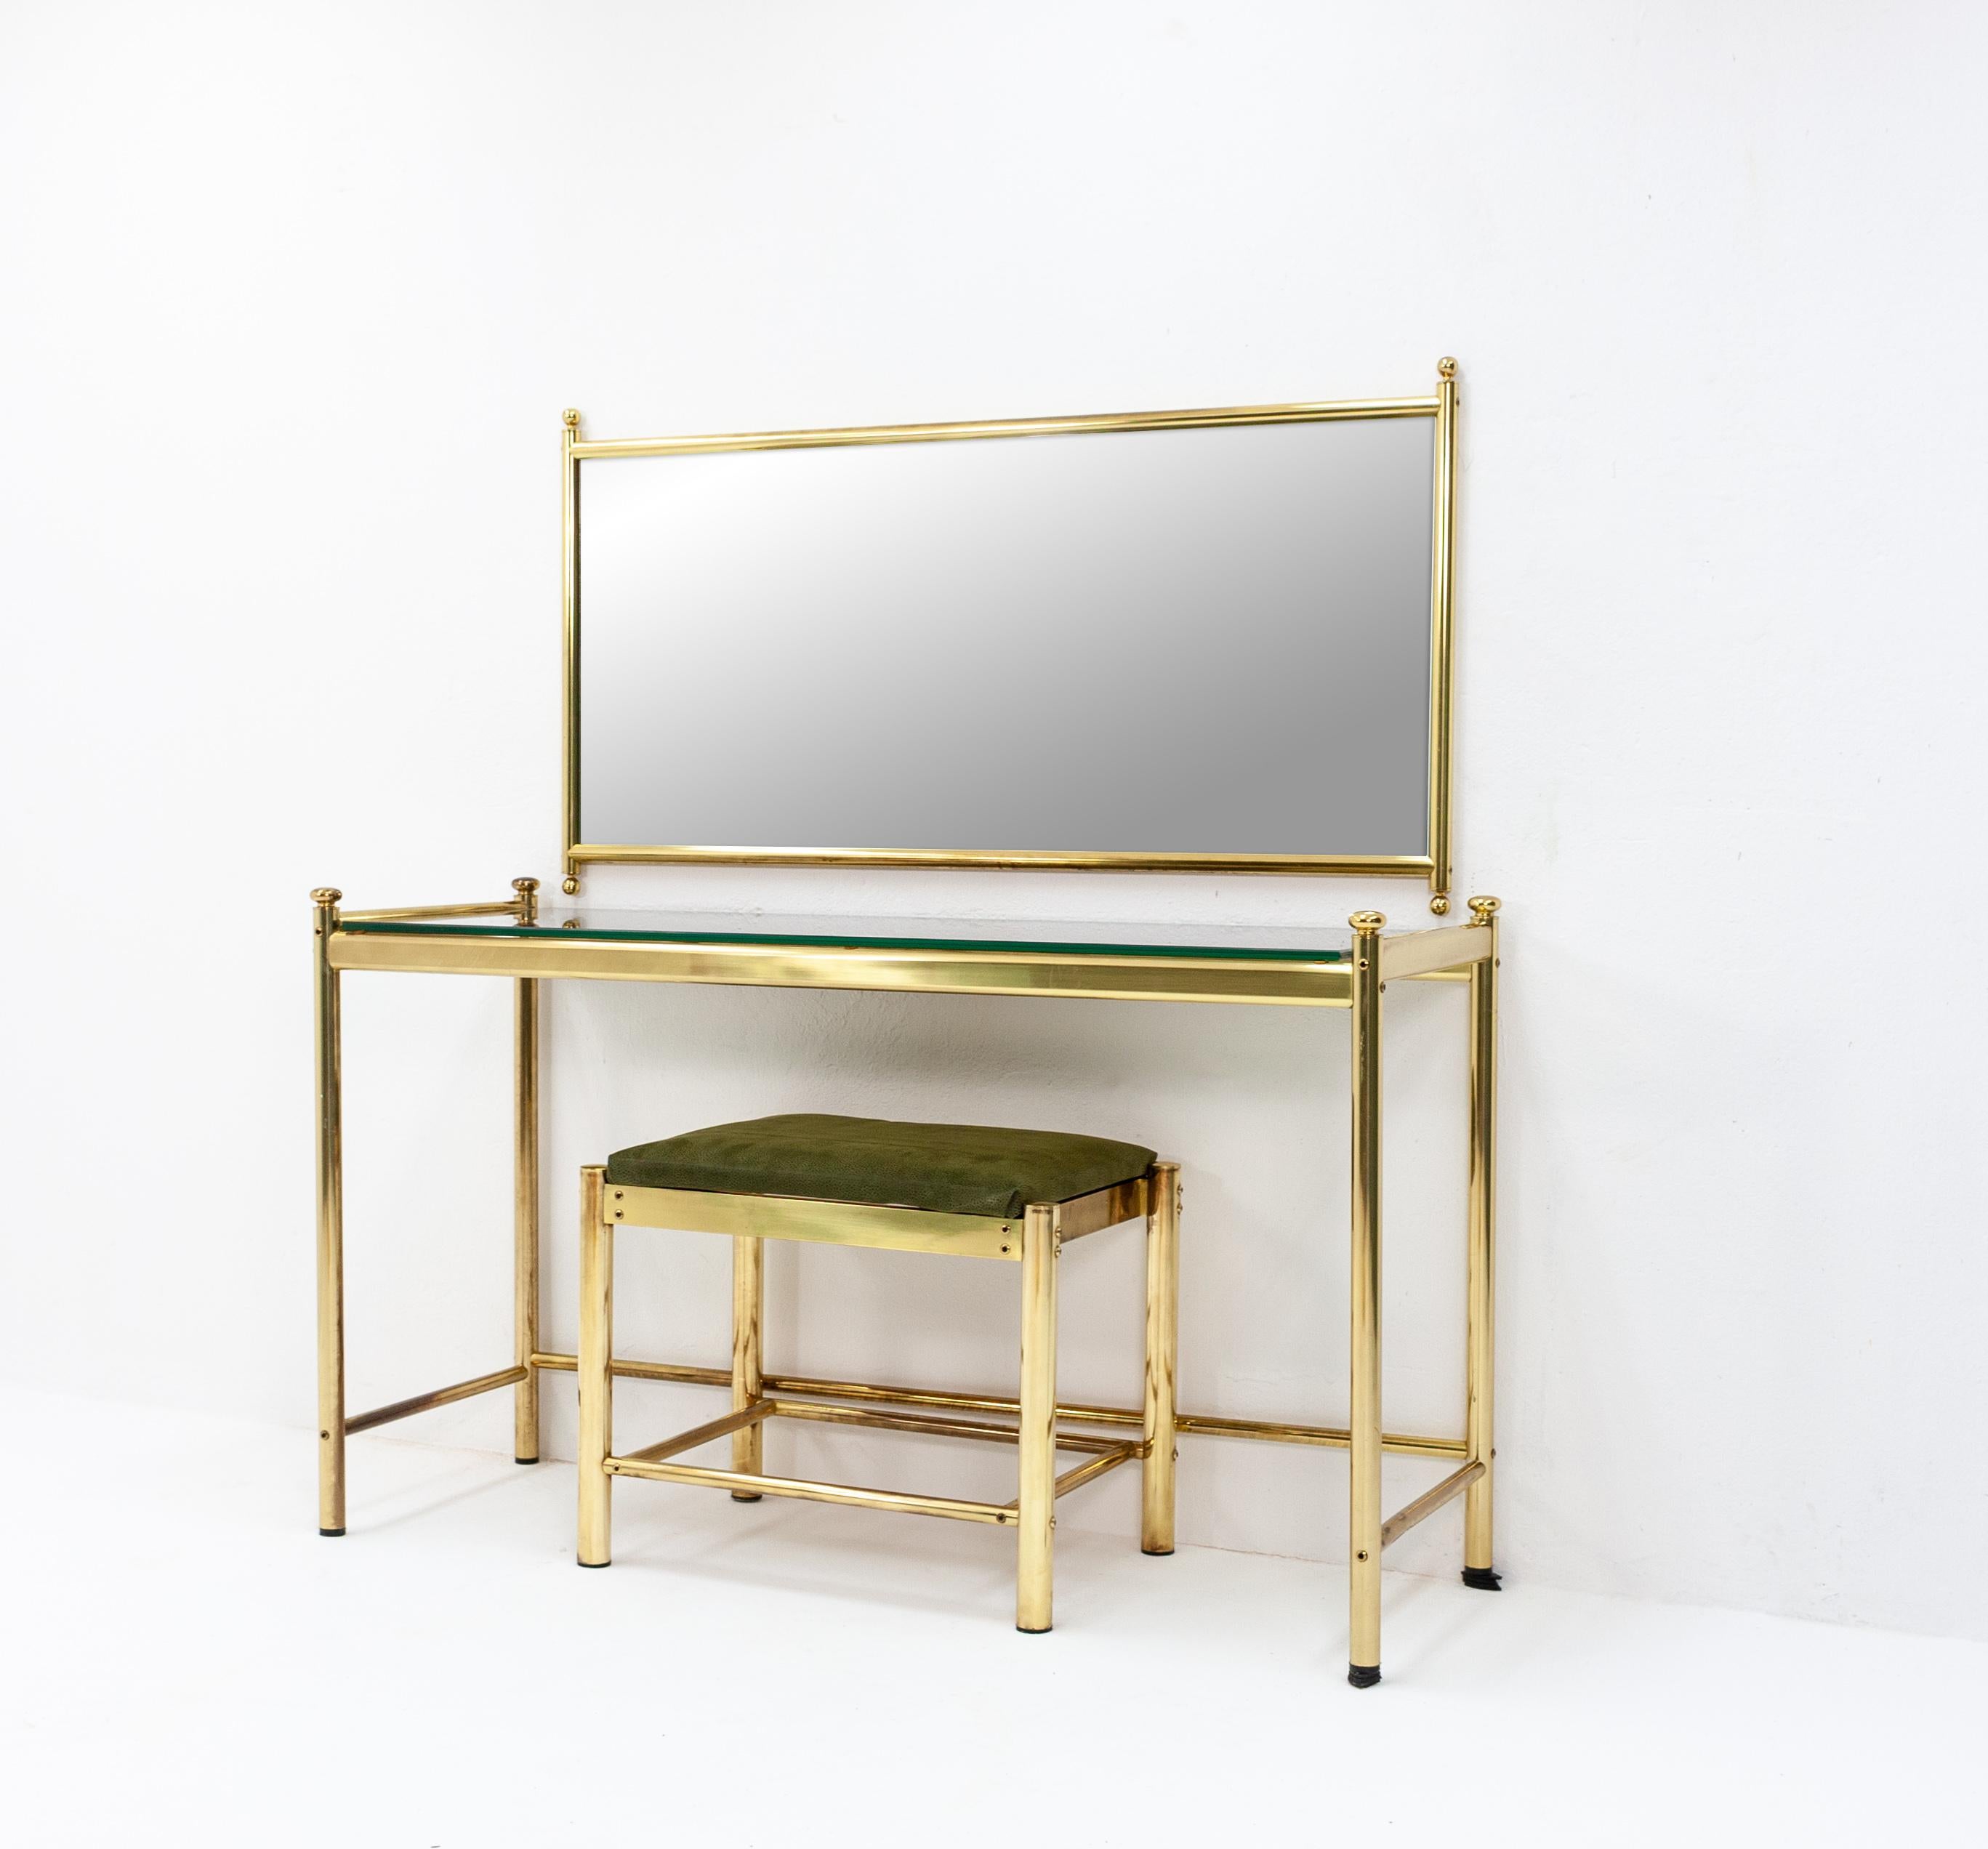 Luxurious brass Finn mirror vanity set consisting of a glass table with a smoked glass top, a wide mirror and a low seat with green upholstery. Great heavy quality plating and glass, 1970s, Finland. Very good quality.